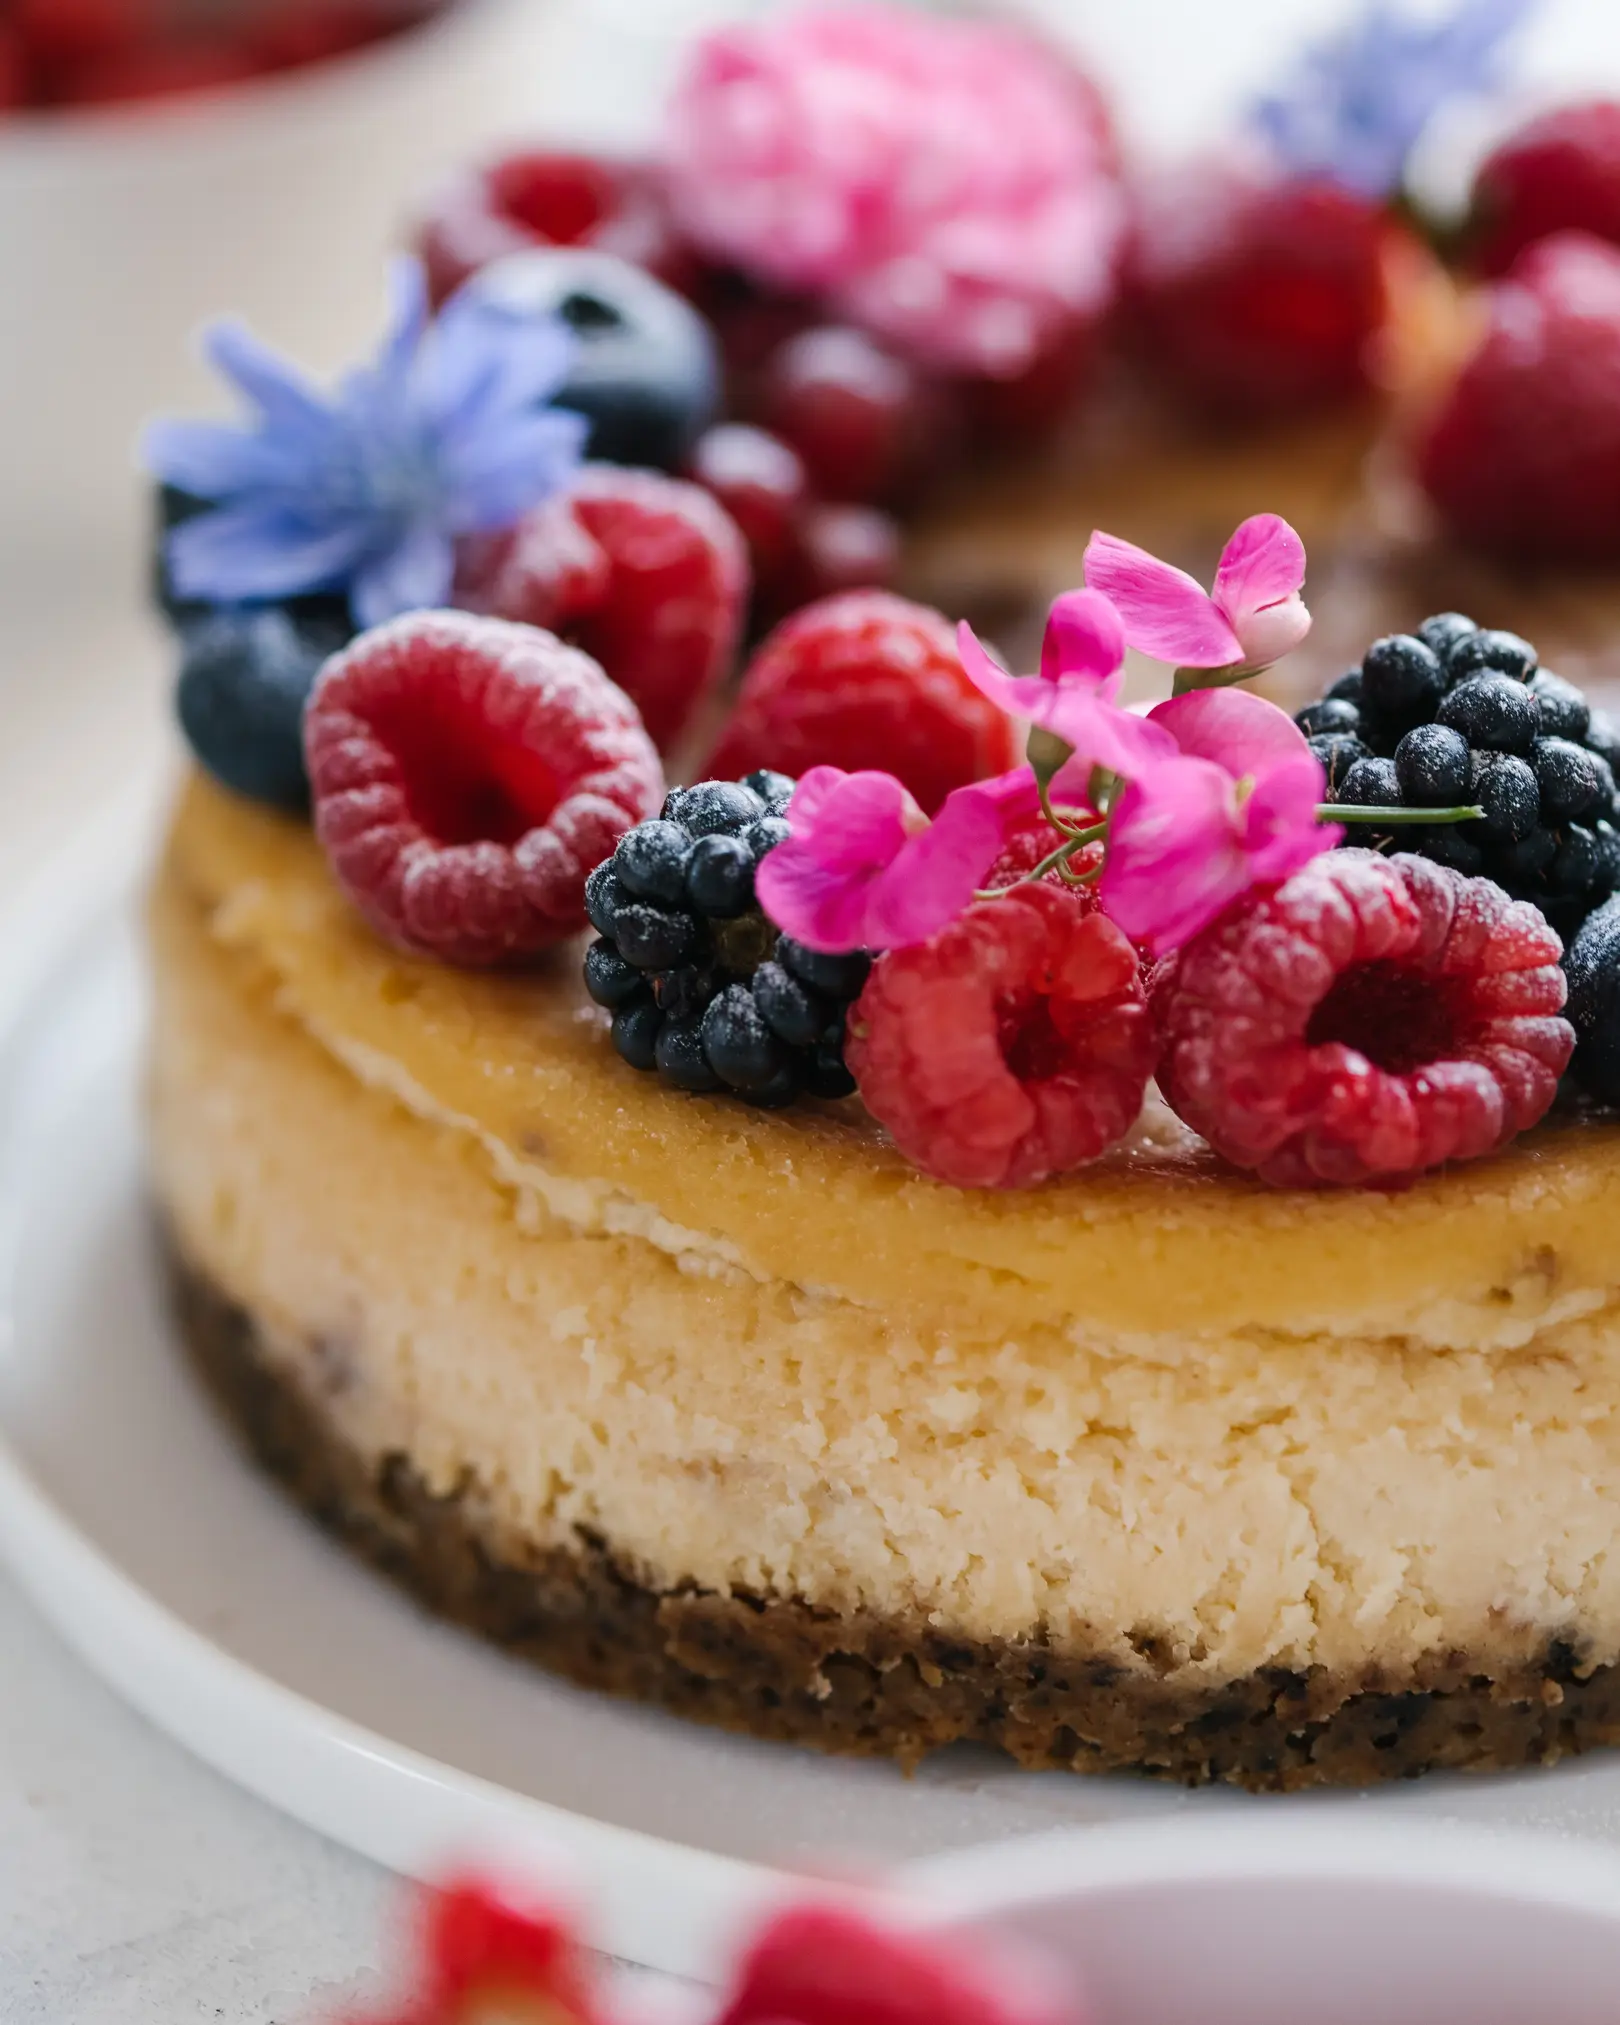 Сhocolate cheesecake Сhocolate cheesecake decorated with berries and flowers.